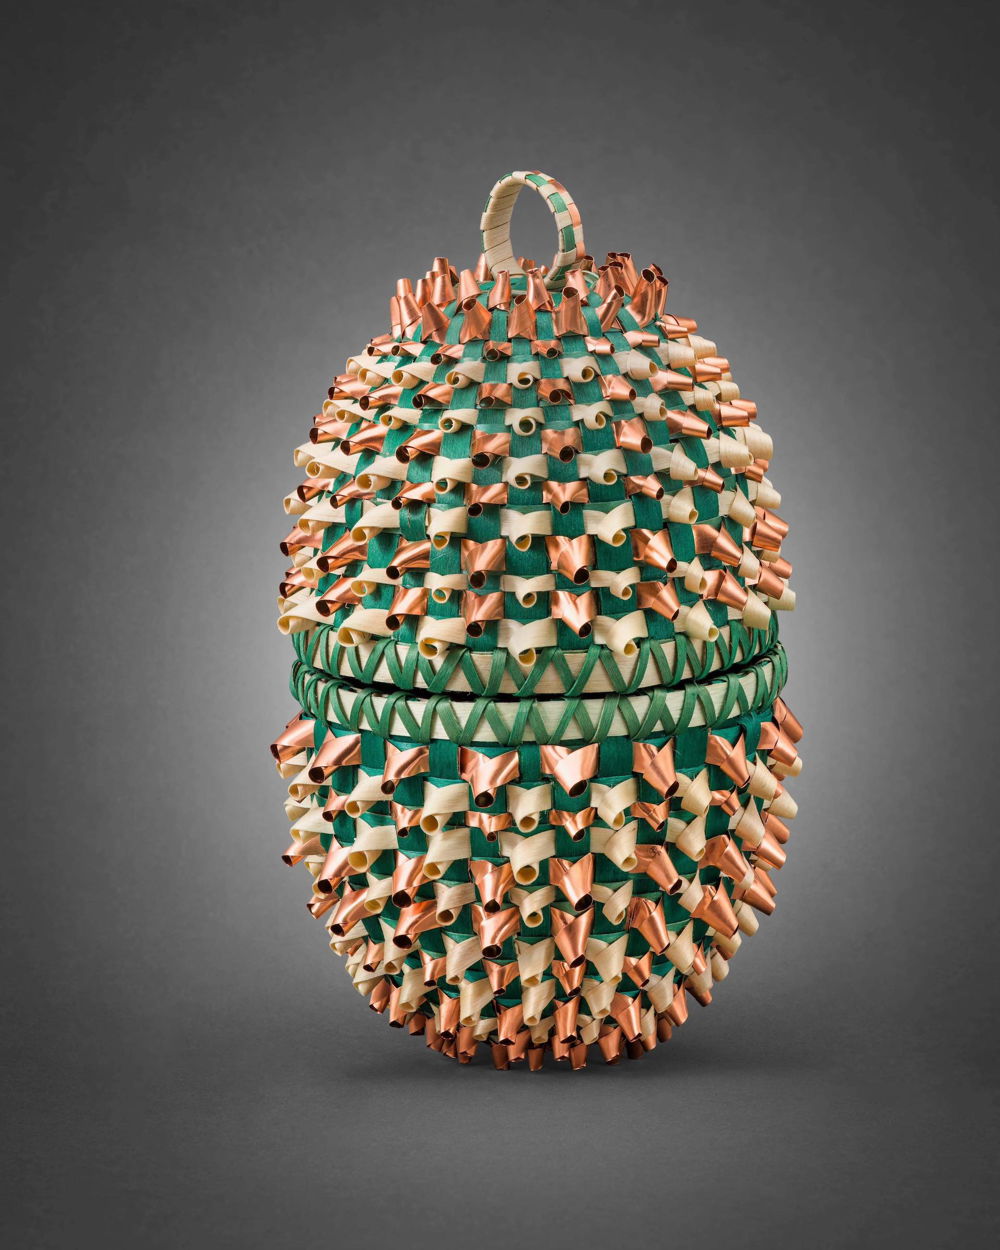 A woven, lidded sweetgrass basket in turquoise with golden accents. On either side of the basket is a green flash drive and a small glass specimen vial with a beetle inside.